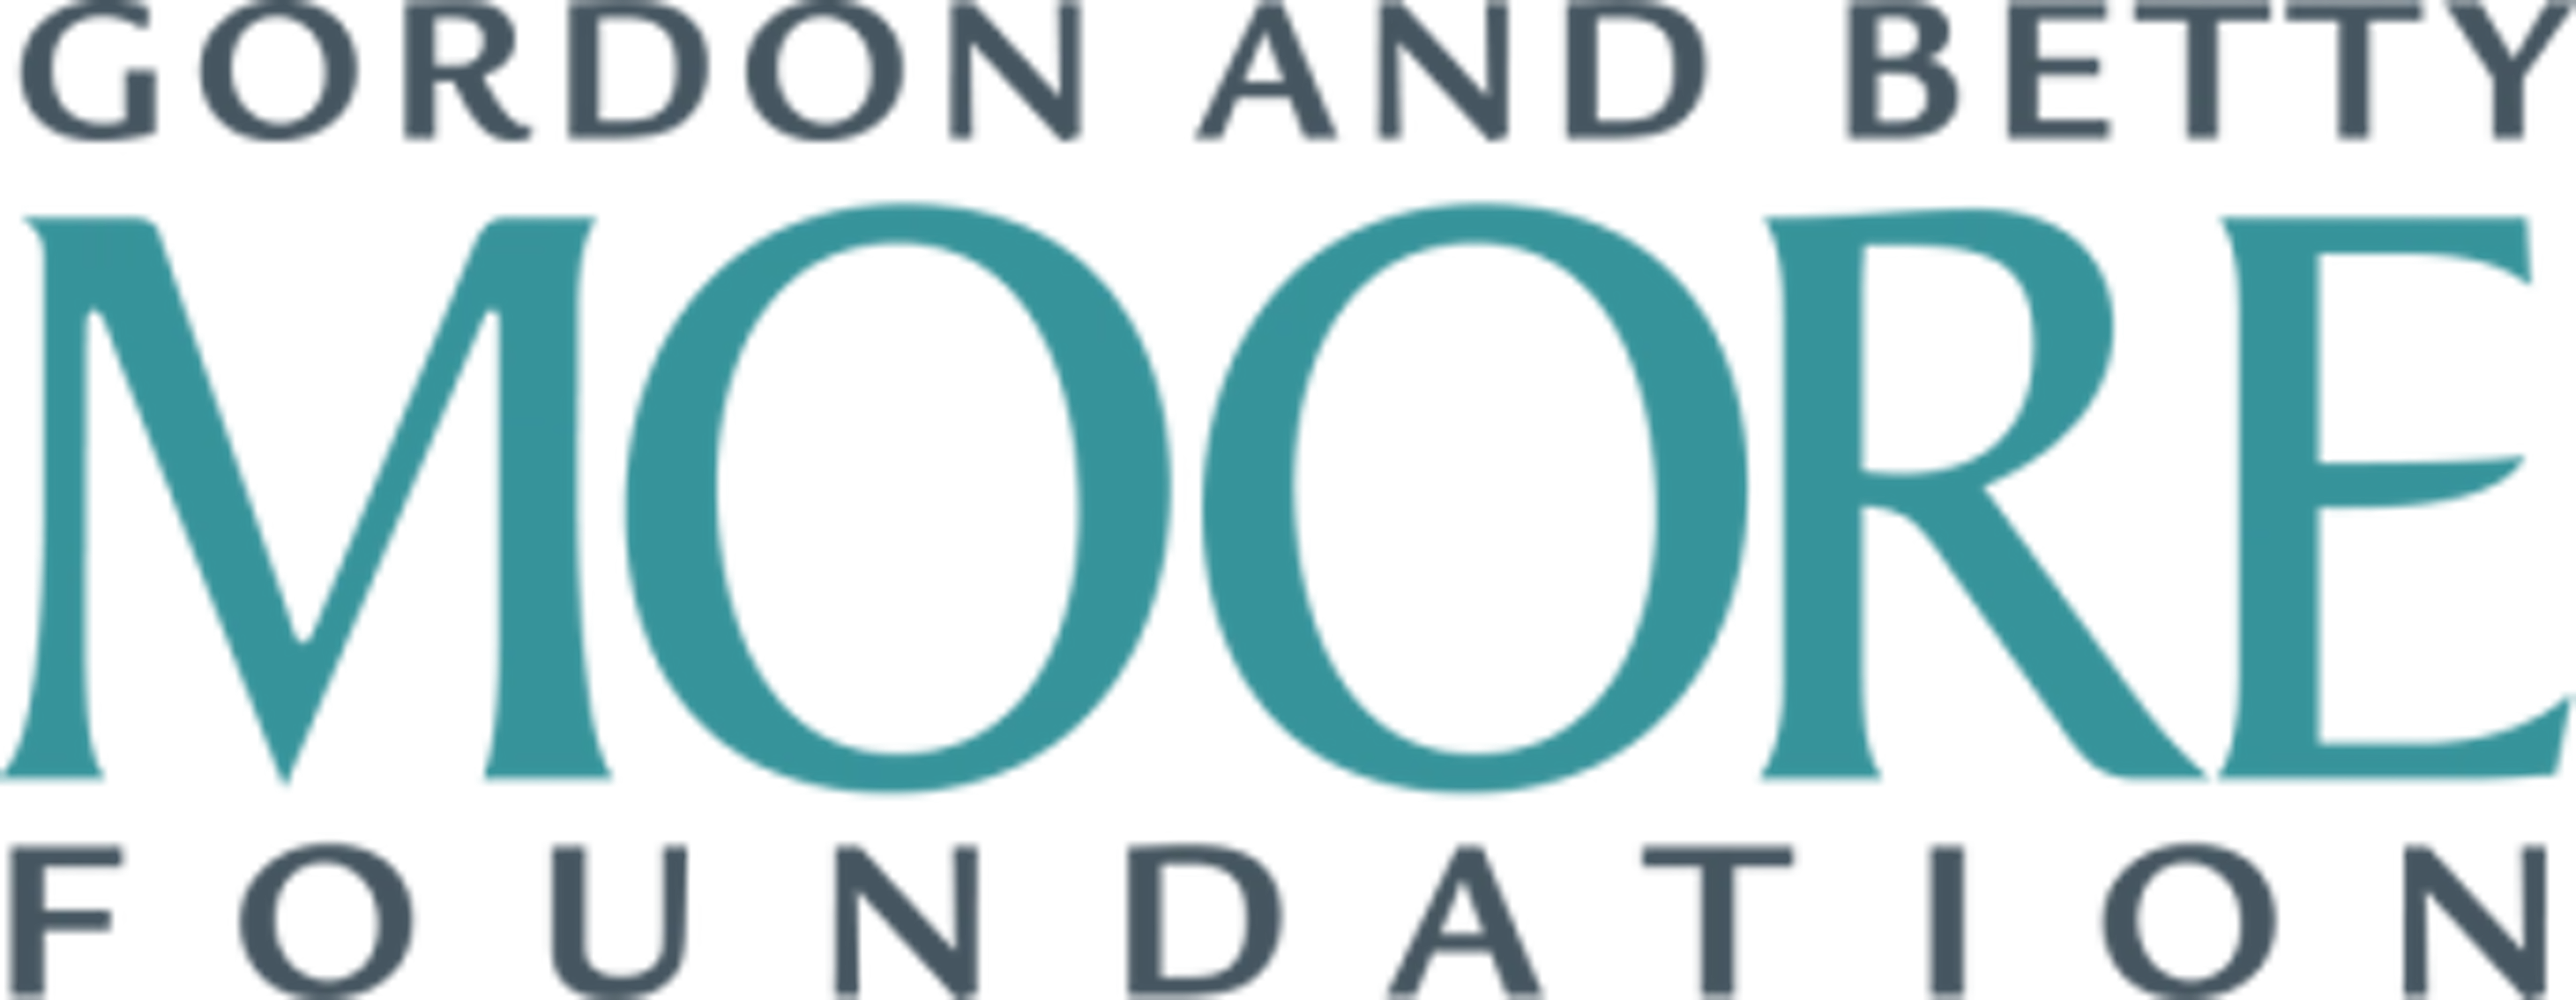 The Gordon and Betty Moore Foundation photo